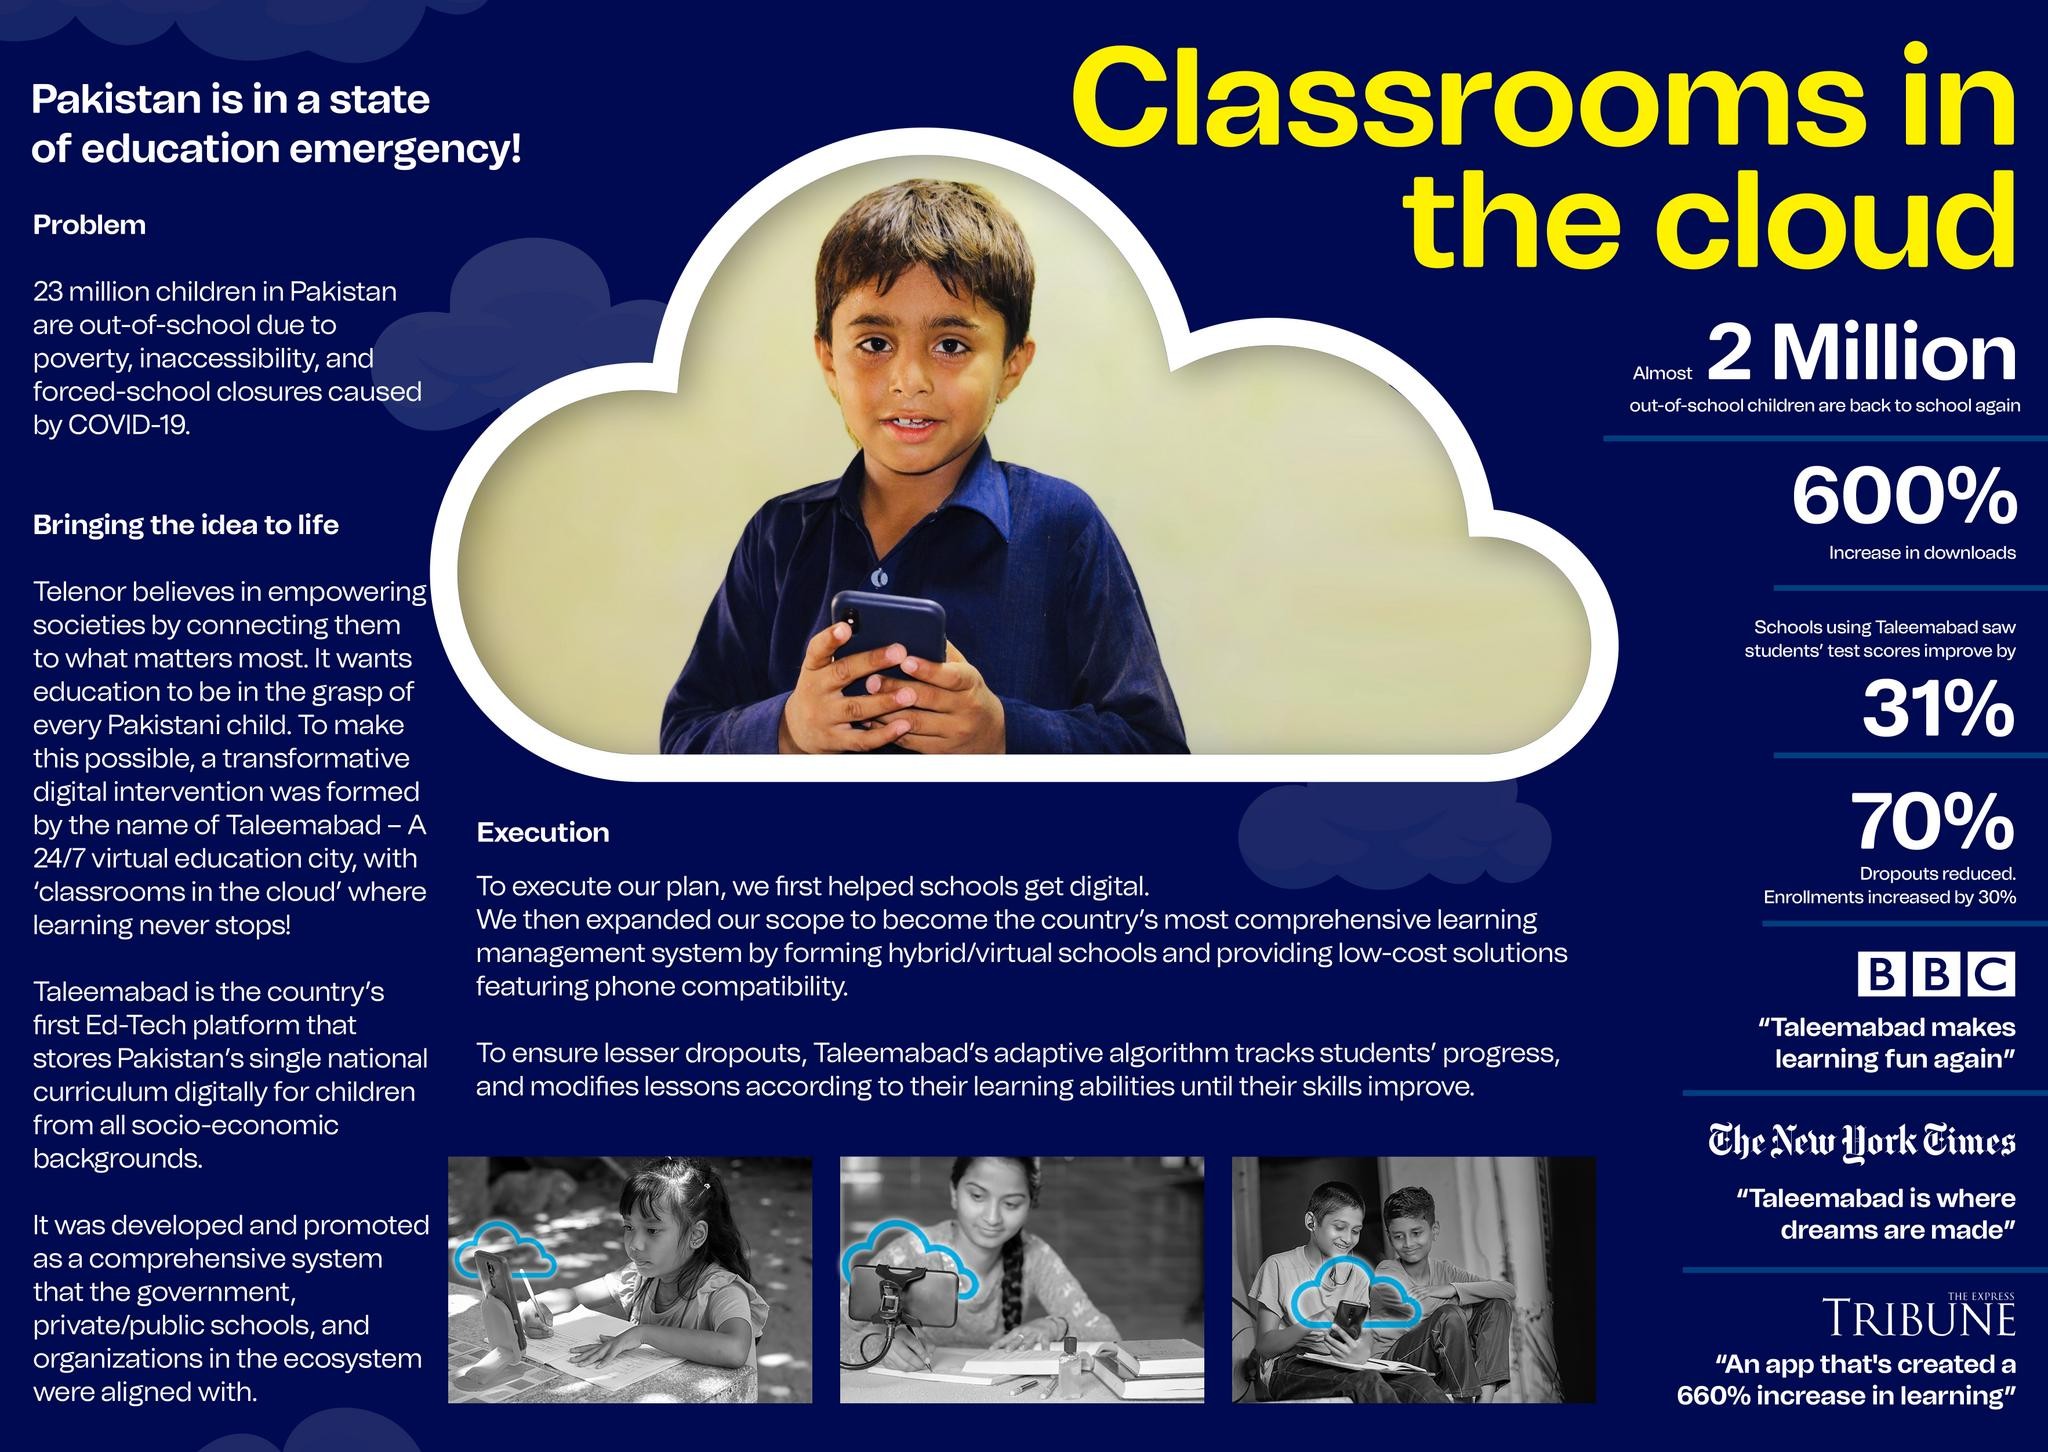 Classrooms in the cloud